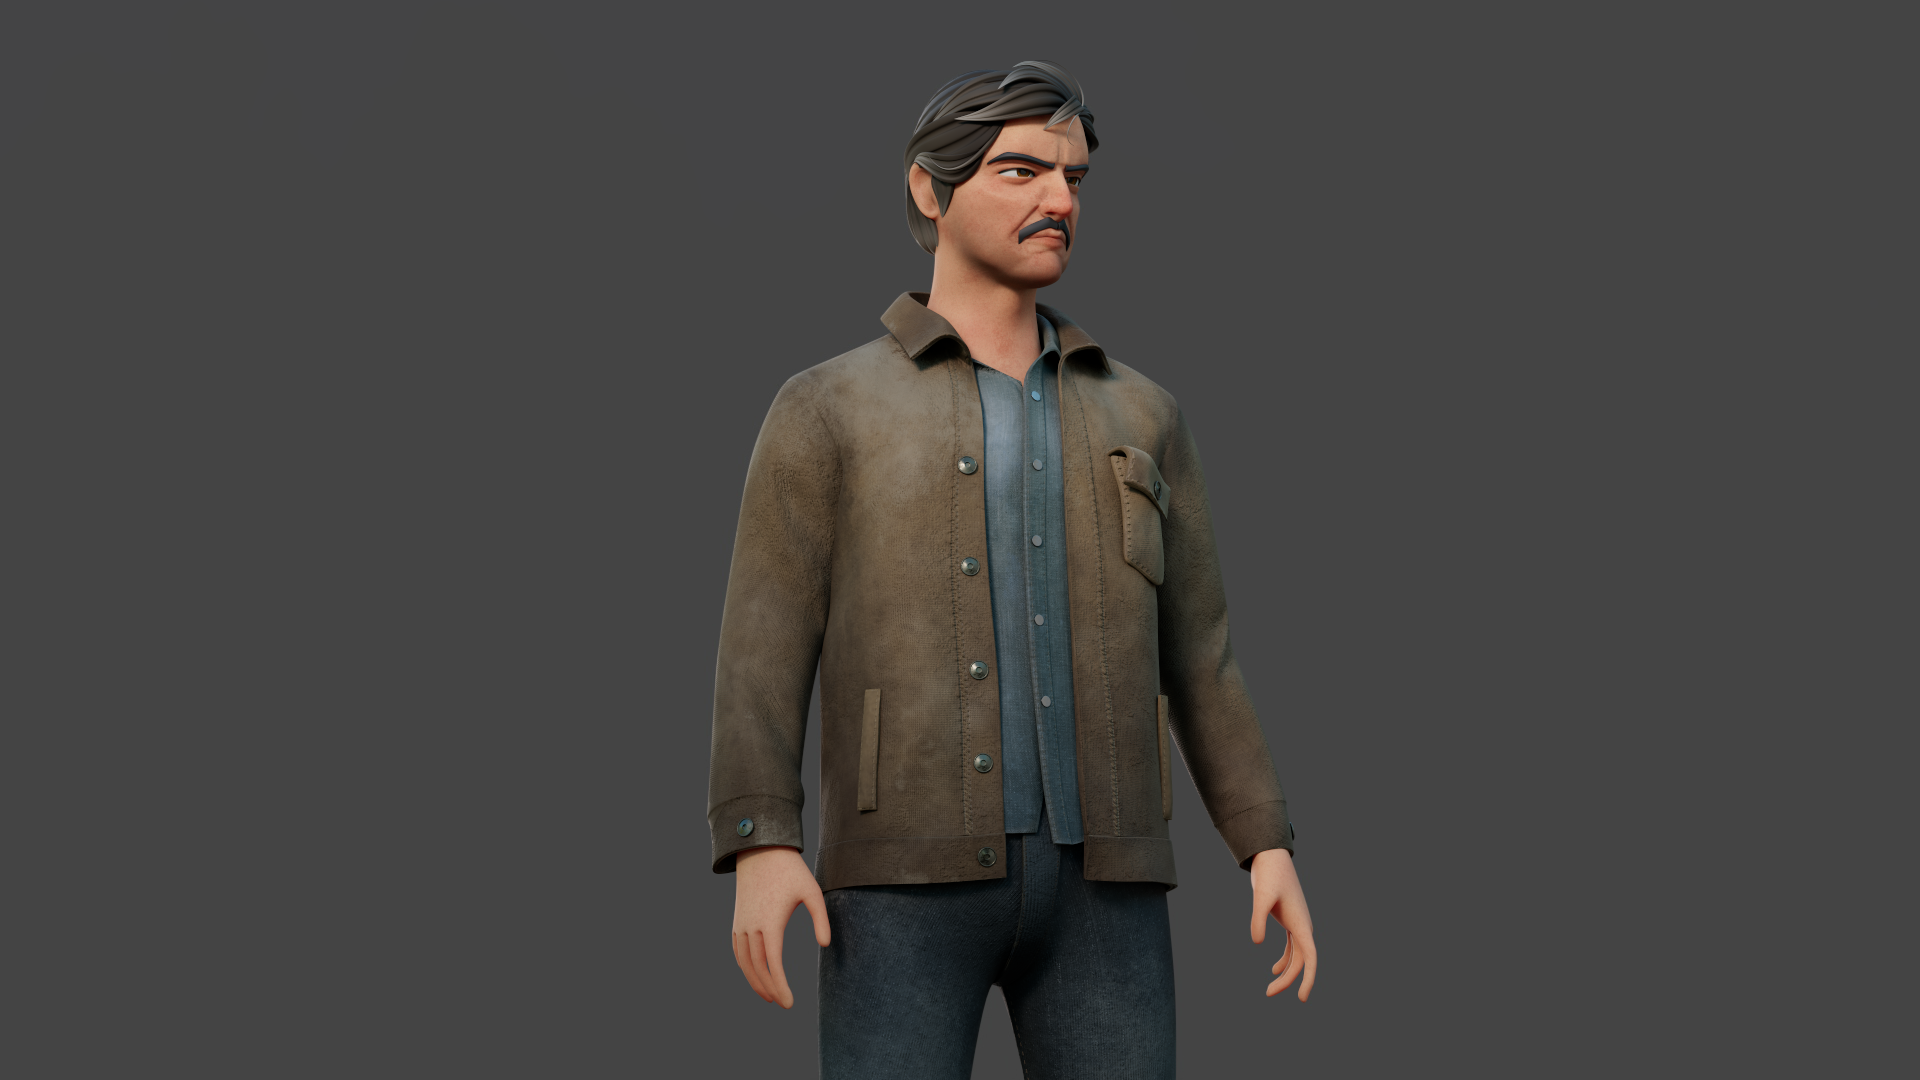 3D character design of Pedro Pascal